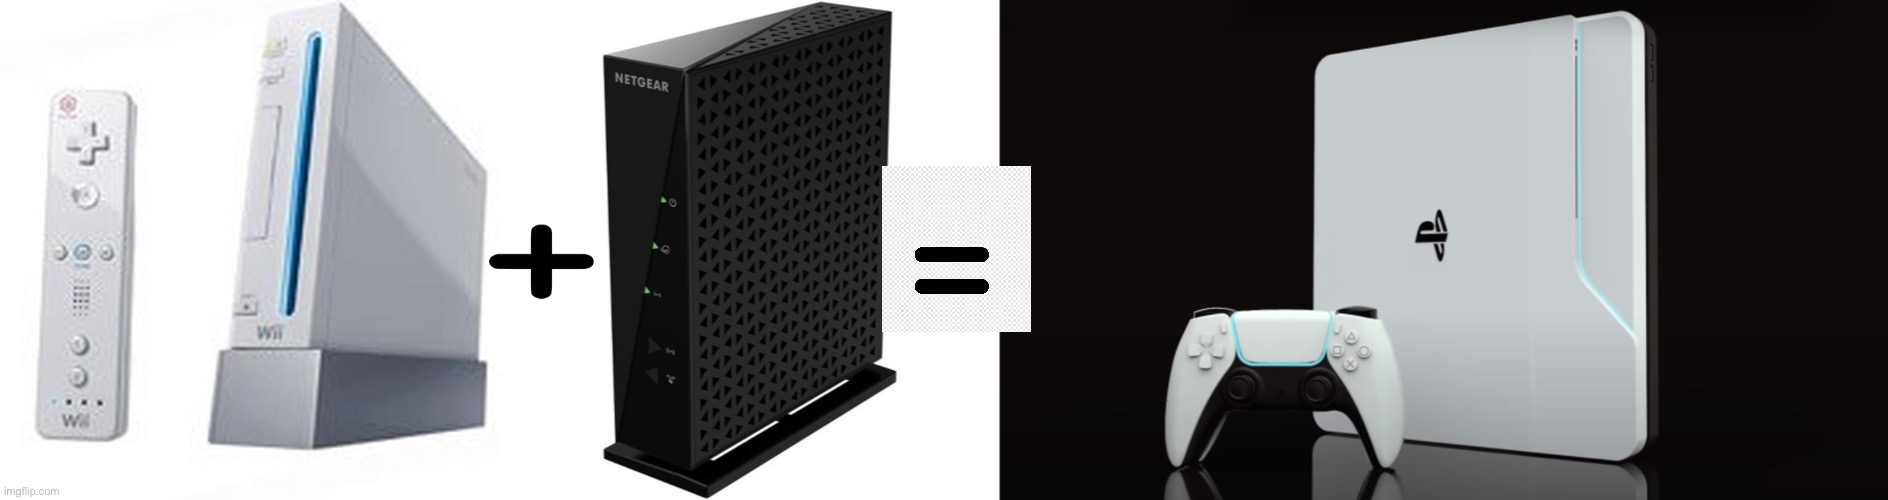 Wii + WiFi Router = PS5 | image tagged in playstation,memes | made w/ Imgflip meme maker